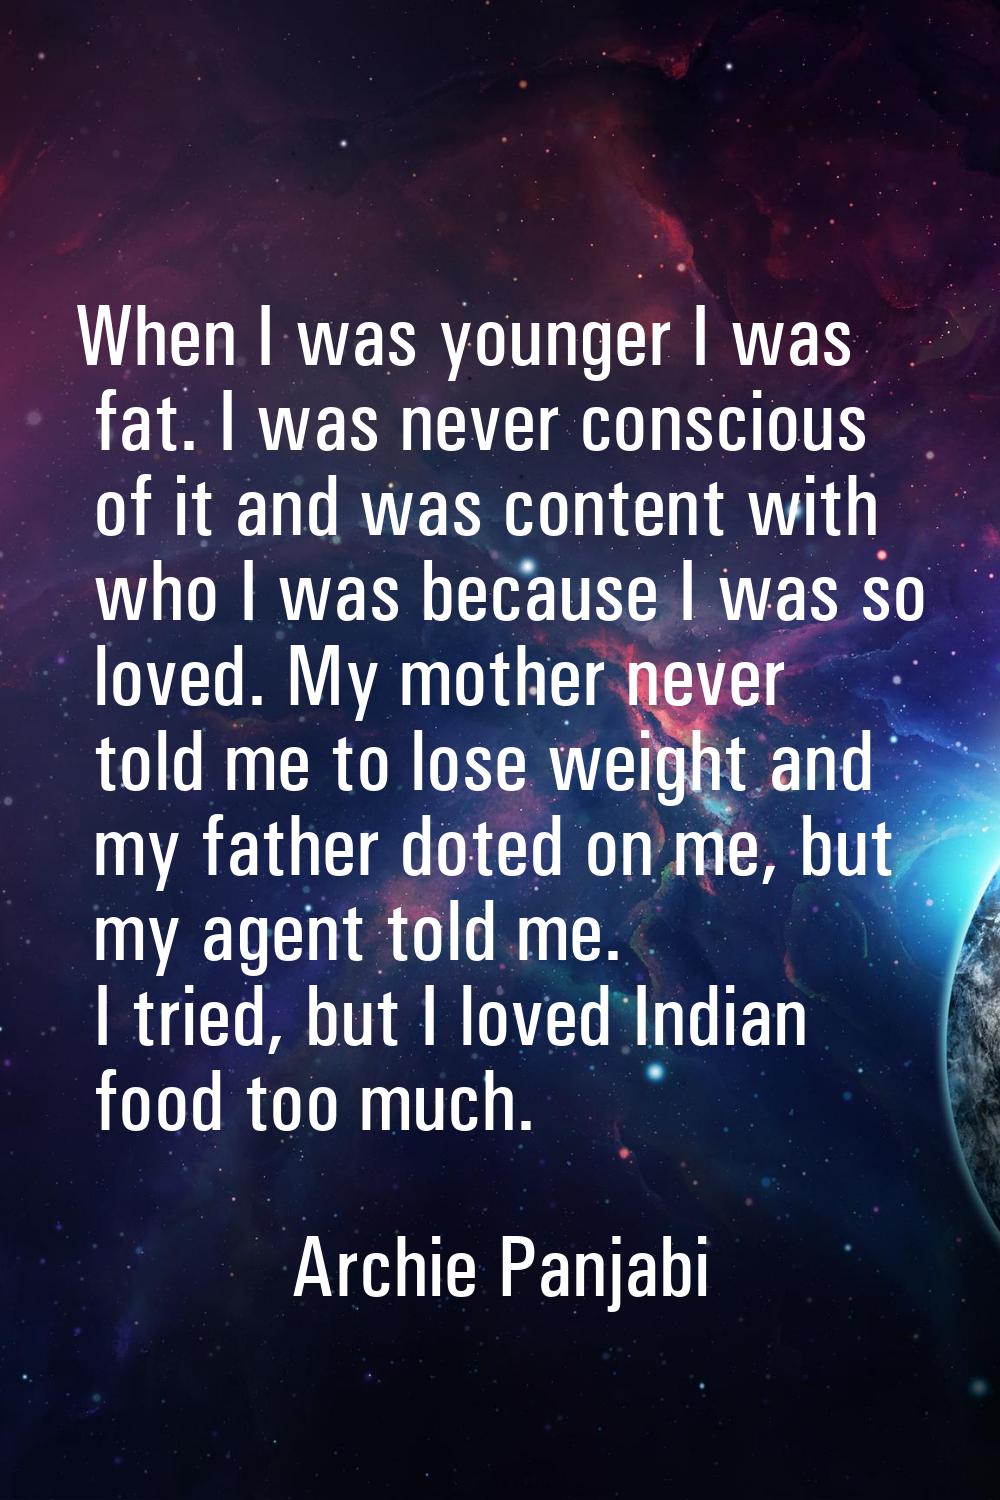 When I was younger I was fat. I was never conscious of it and was content with who I was because I 